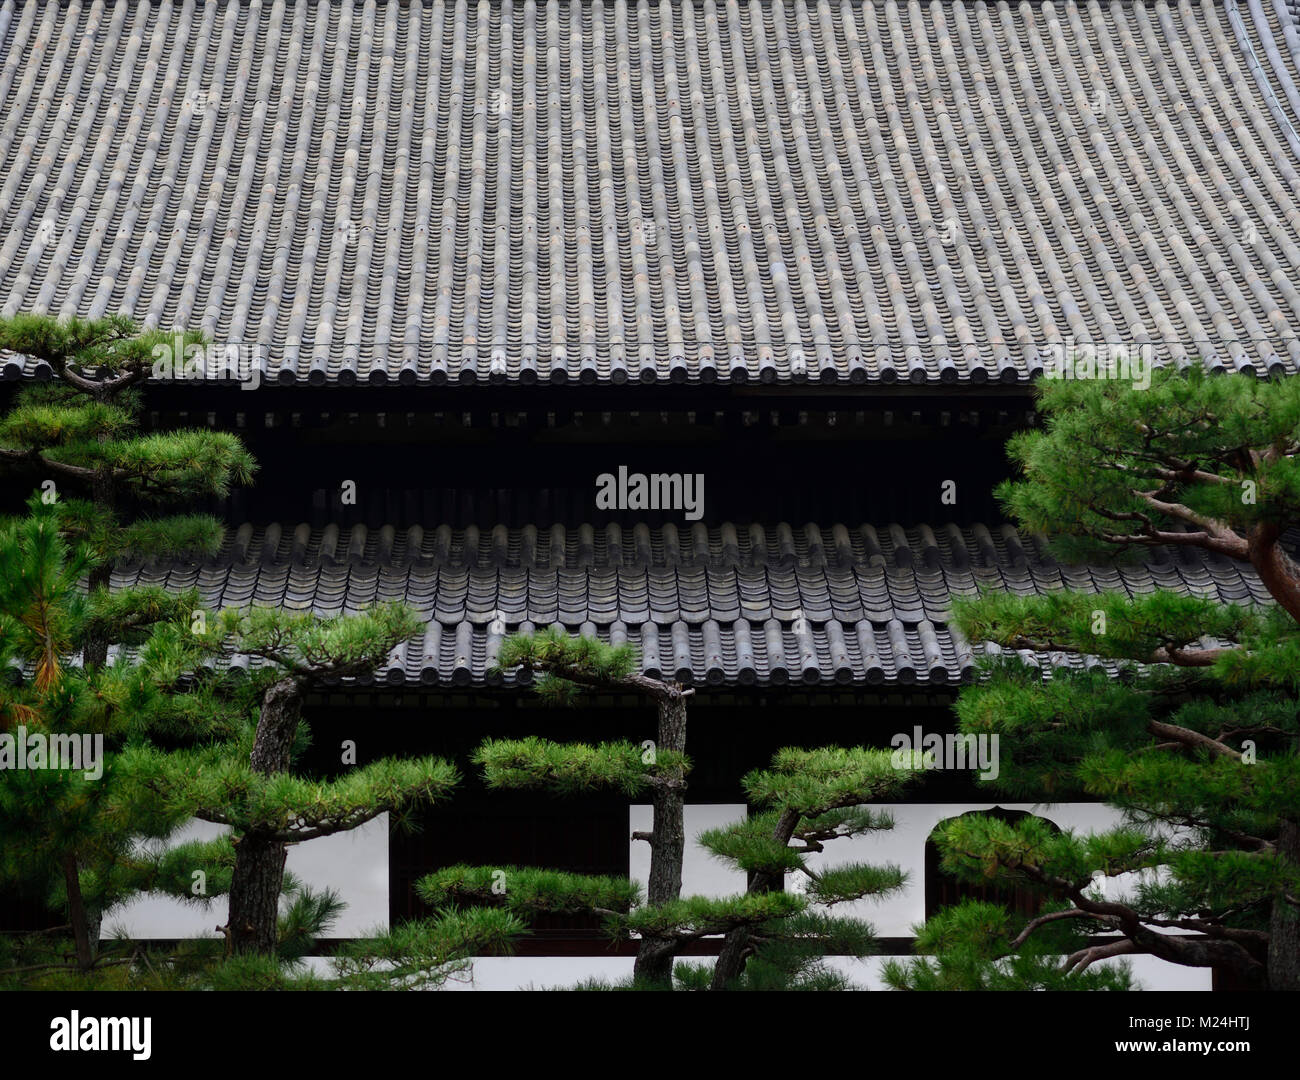 Japanese black pines, pinus thunbergii, in front of a Tofukuji temple building roof in Kyoto, Japan Stock Photo